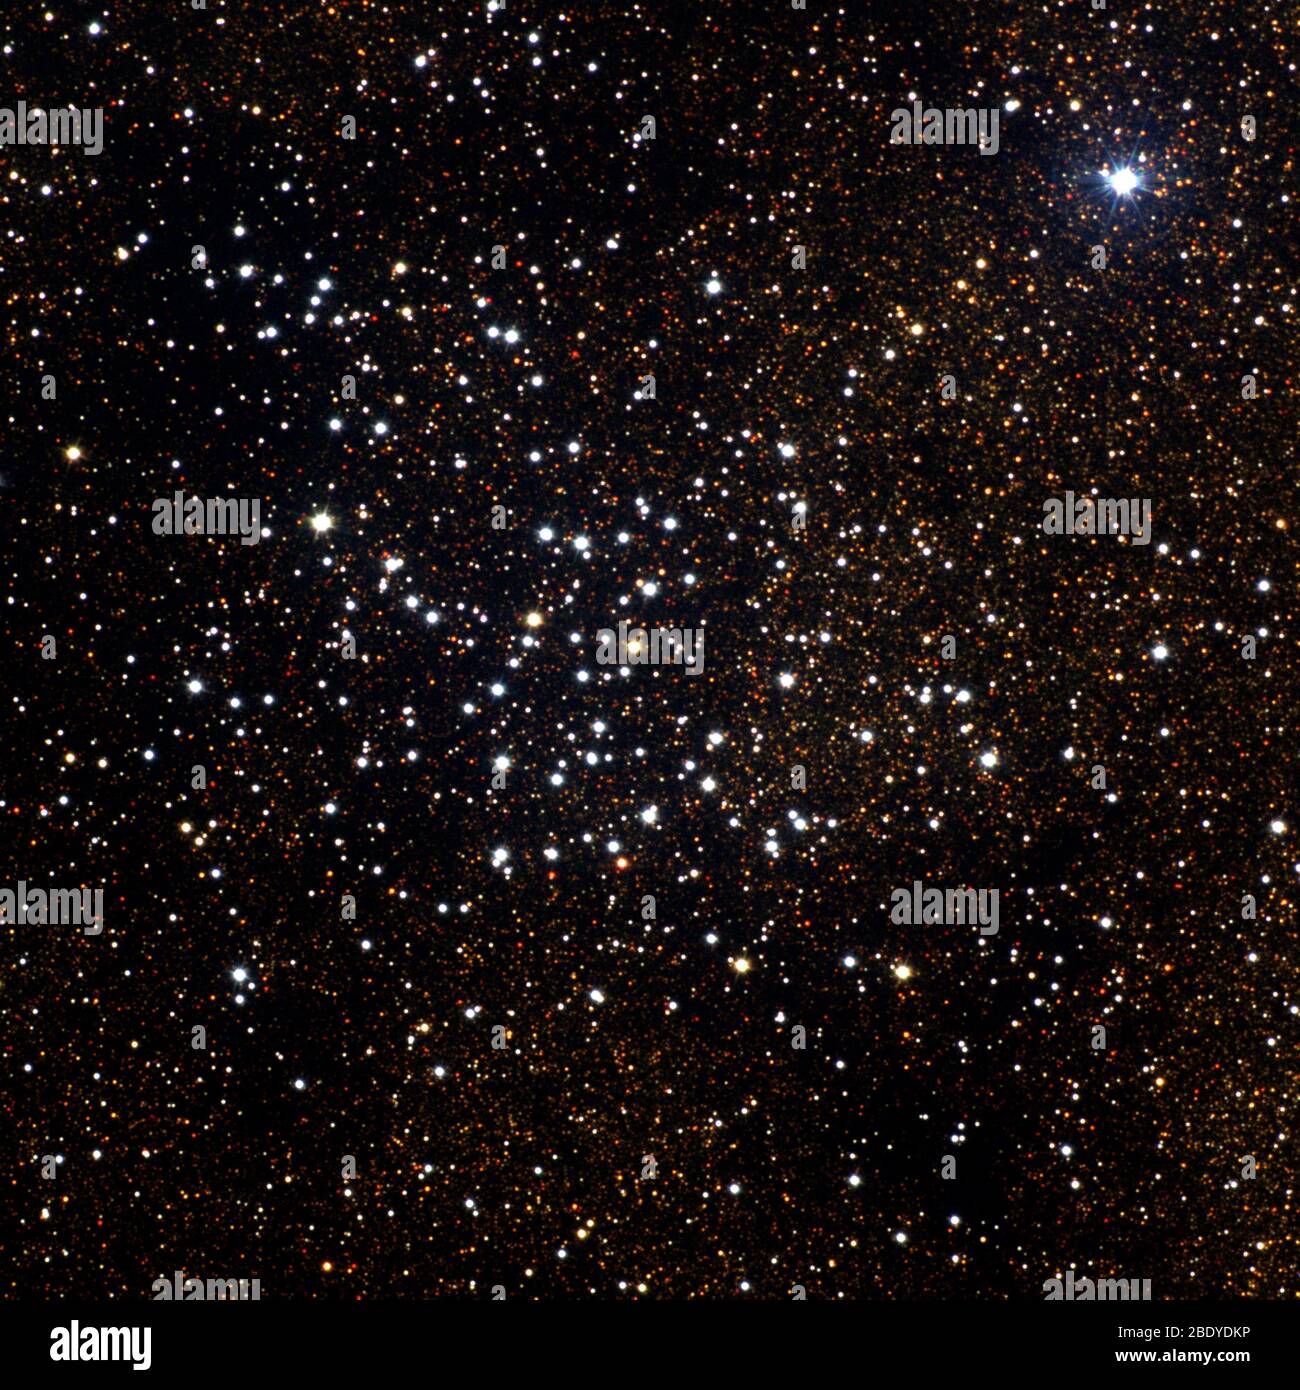 Open Star Cluster, M23, NGC Foto Stock